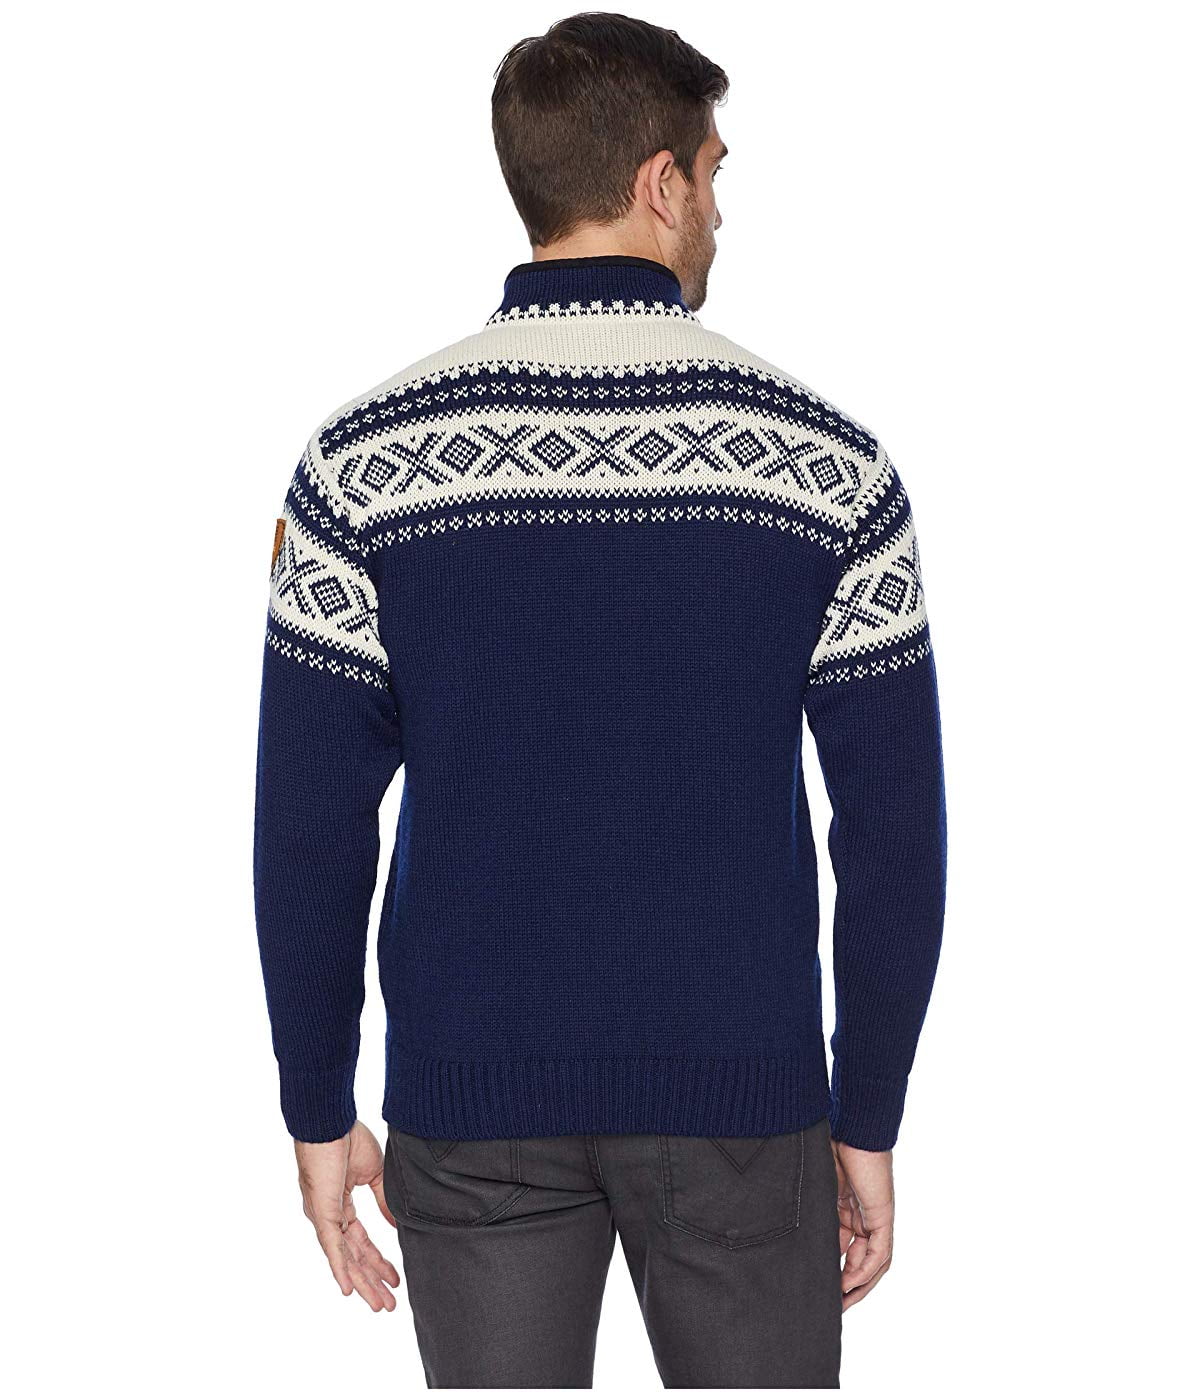 Dale of Norway - Dale of Norway Cortina 1/2 Zip Sweater C-Light Navy ...